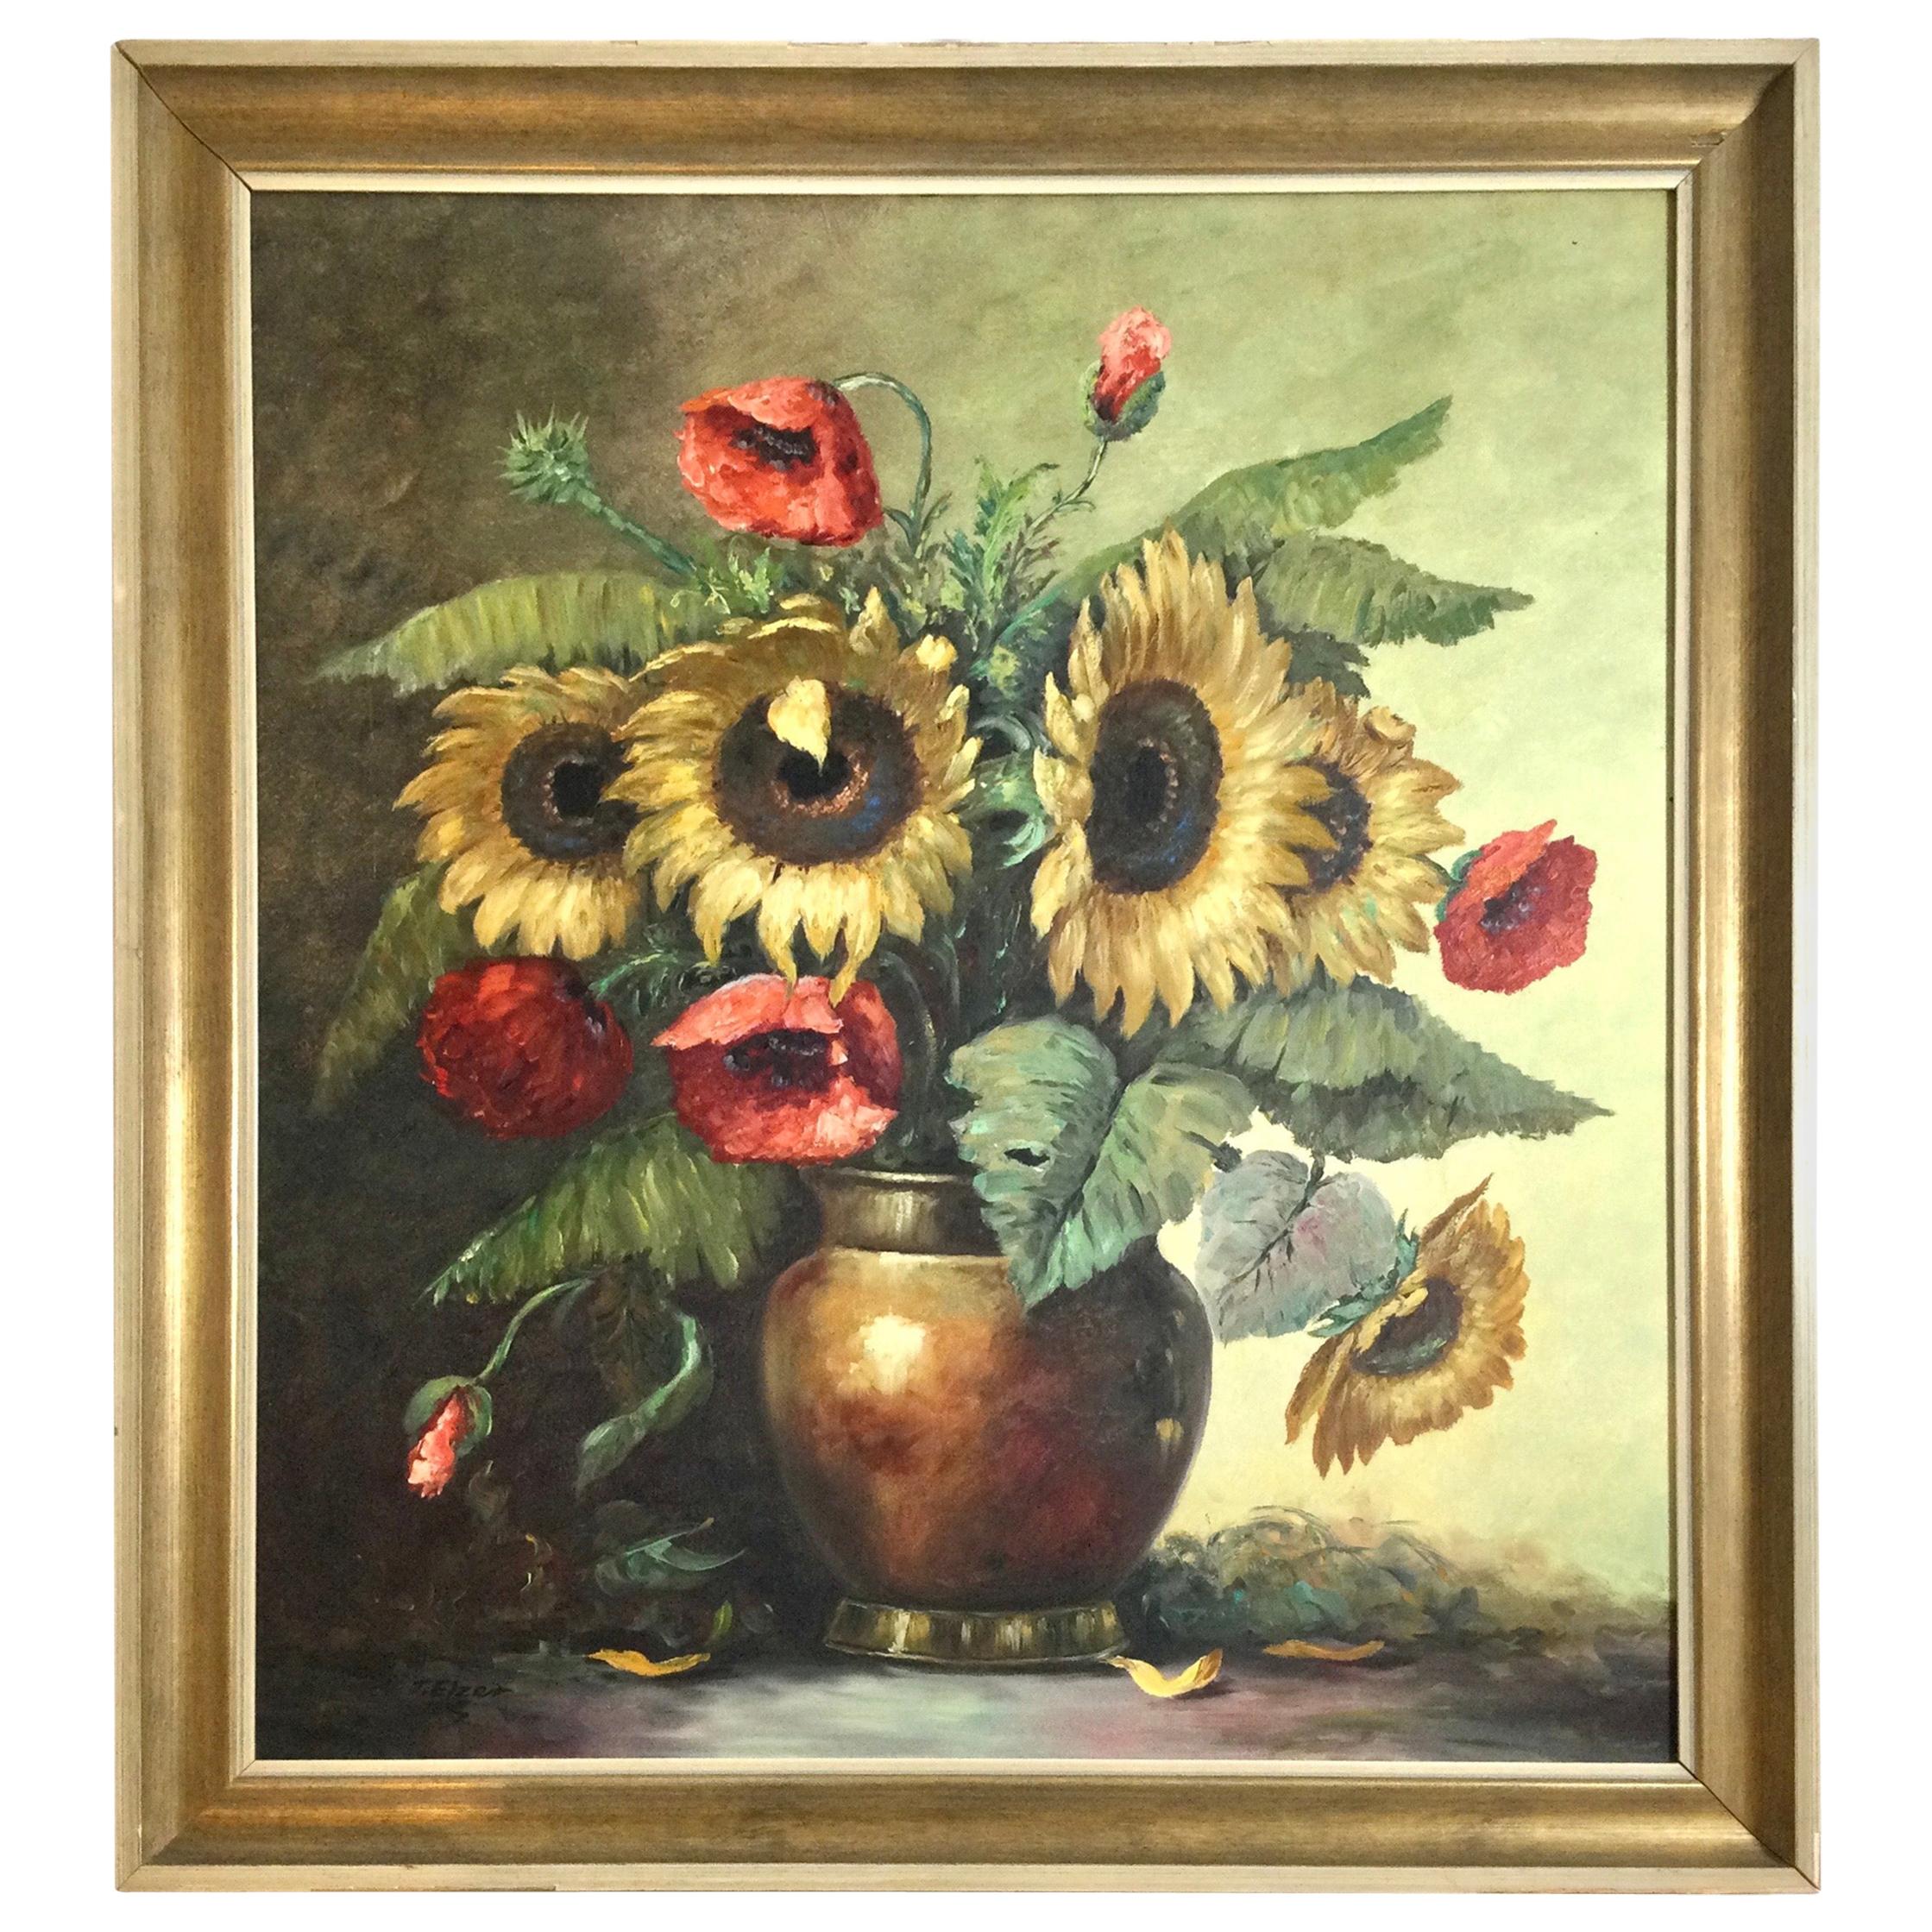 Sunflowers and Poppies Oil on Canvas Signed T. Elzer